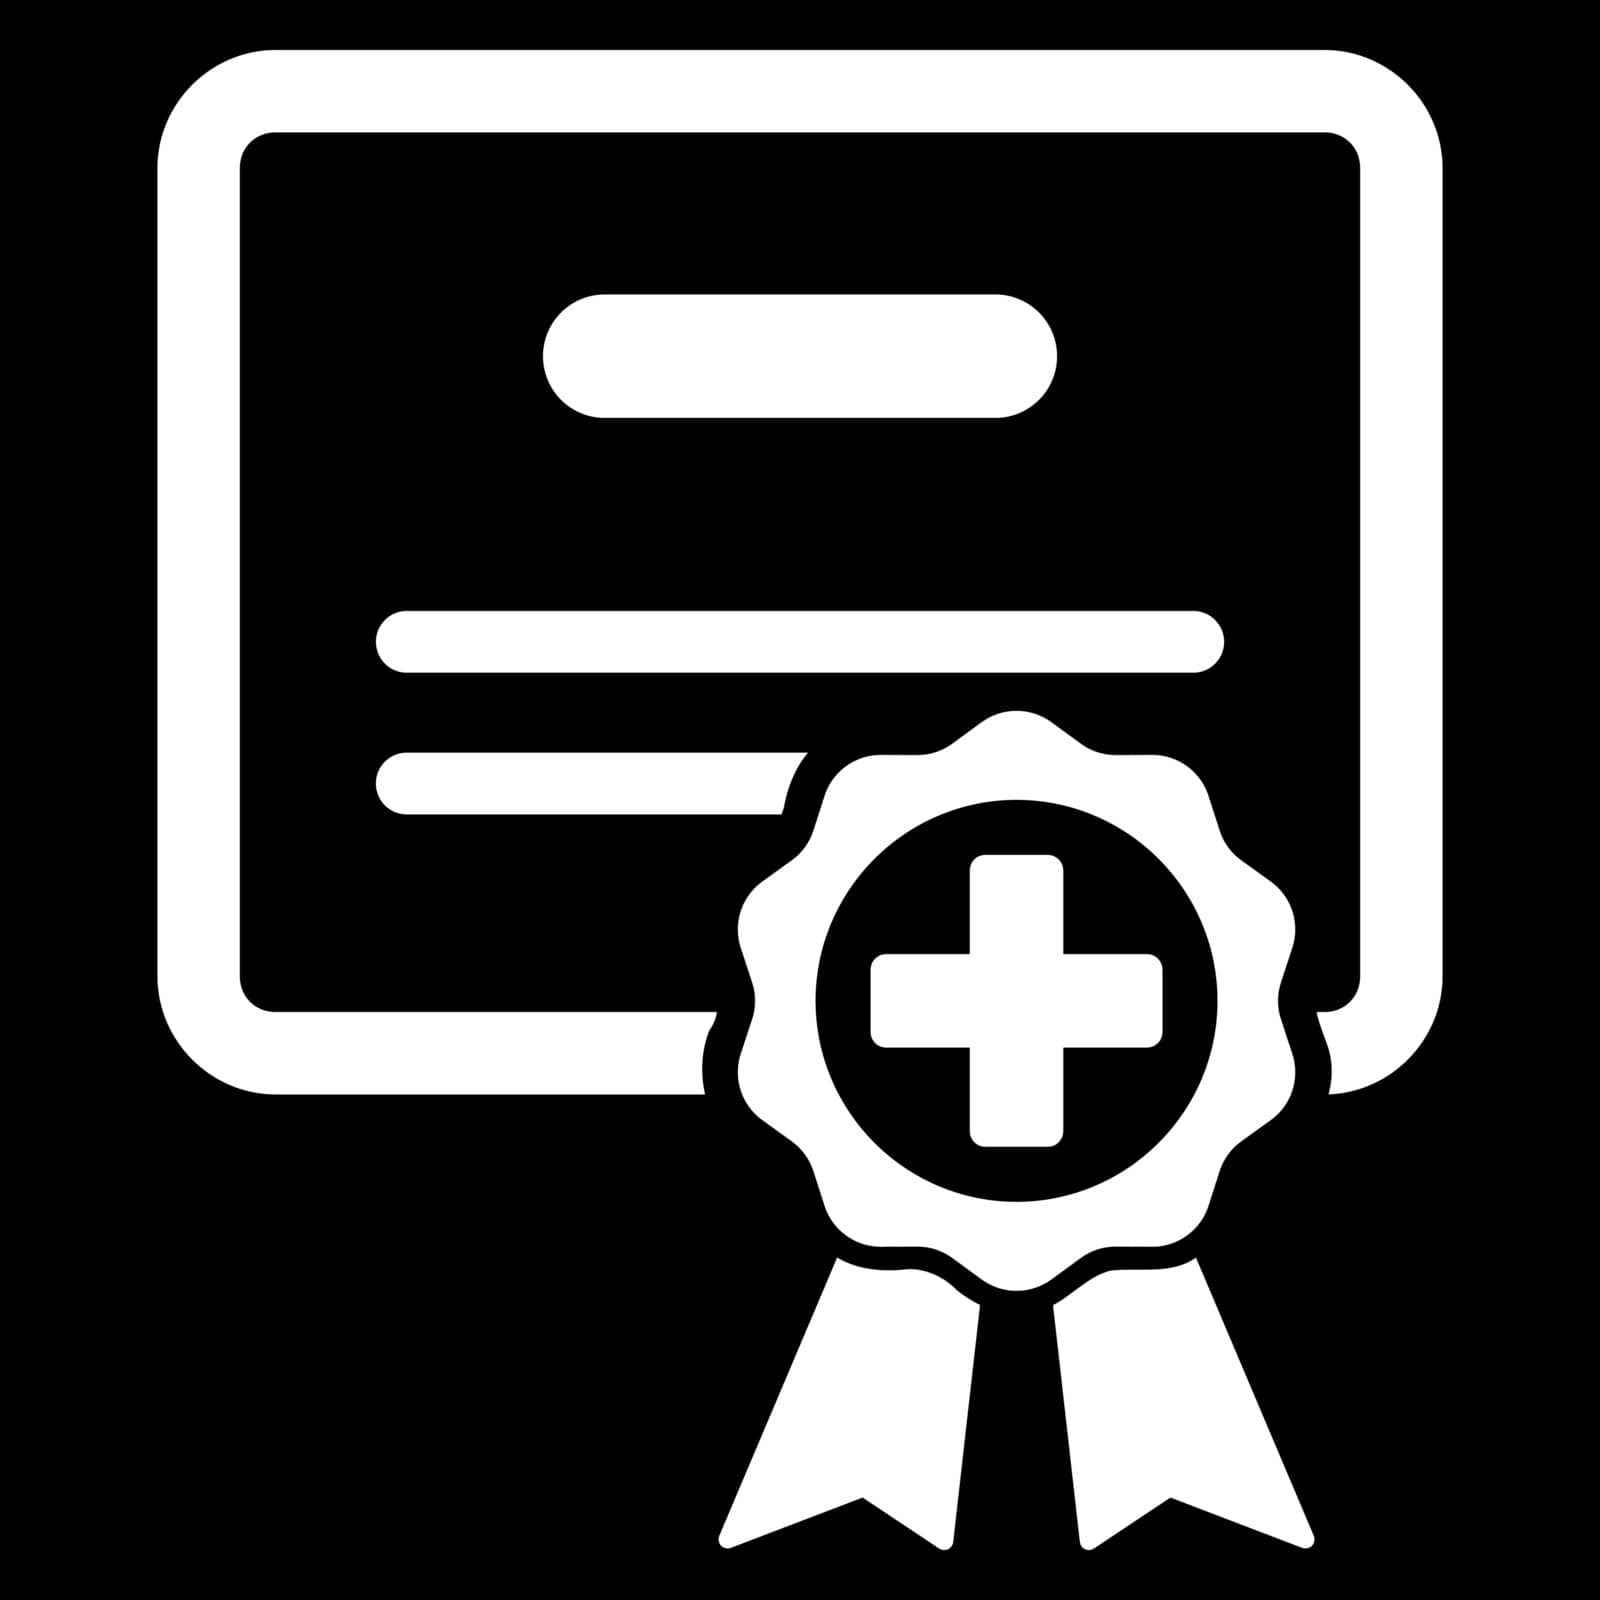 Medical Certificate vector icon. Style is flat symbol, white color, rounded angles, black background.